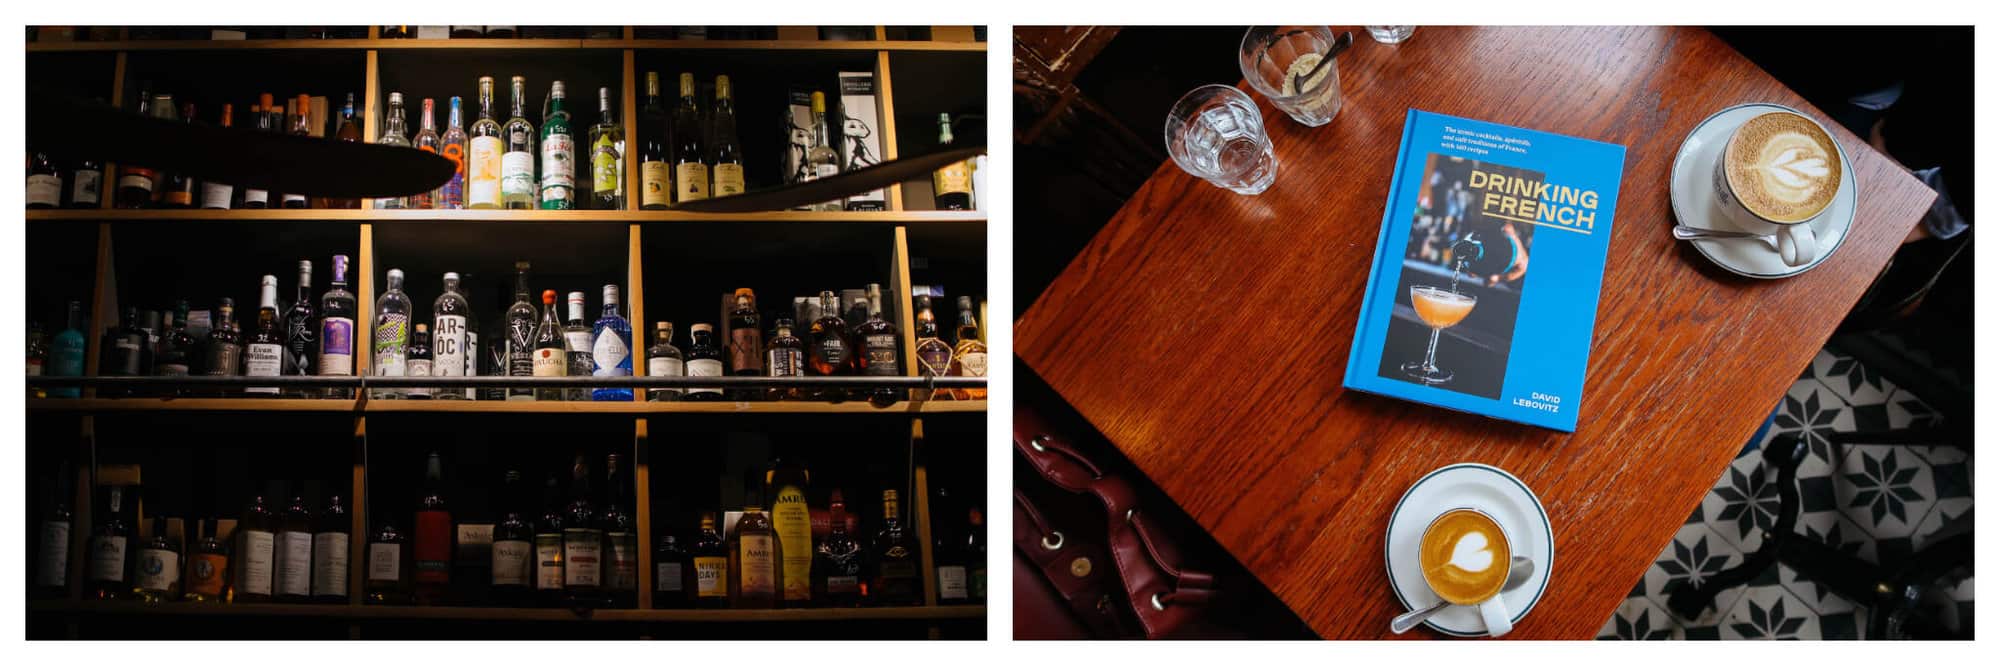 Left: shelving filled with several bottles of liquor. It is unclear what kind of alcohol it is but there are three shelves. Right: an aerial view of the cover of David Lebovitz's book "Drinking French." The book is bright blue and is on top of a wooden table with two cups of coffee.